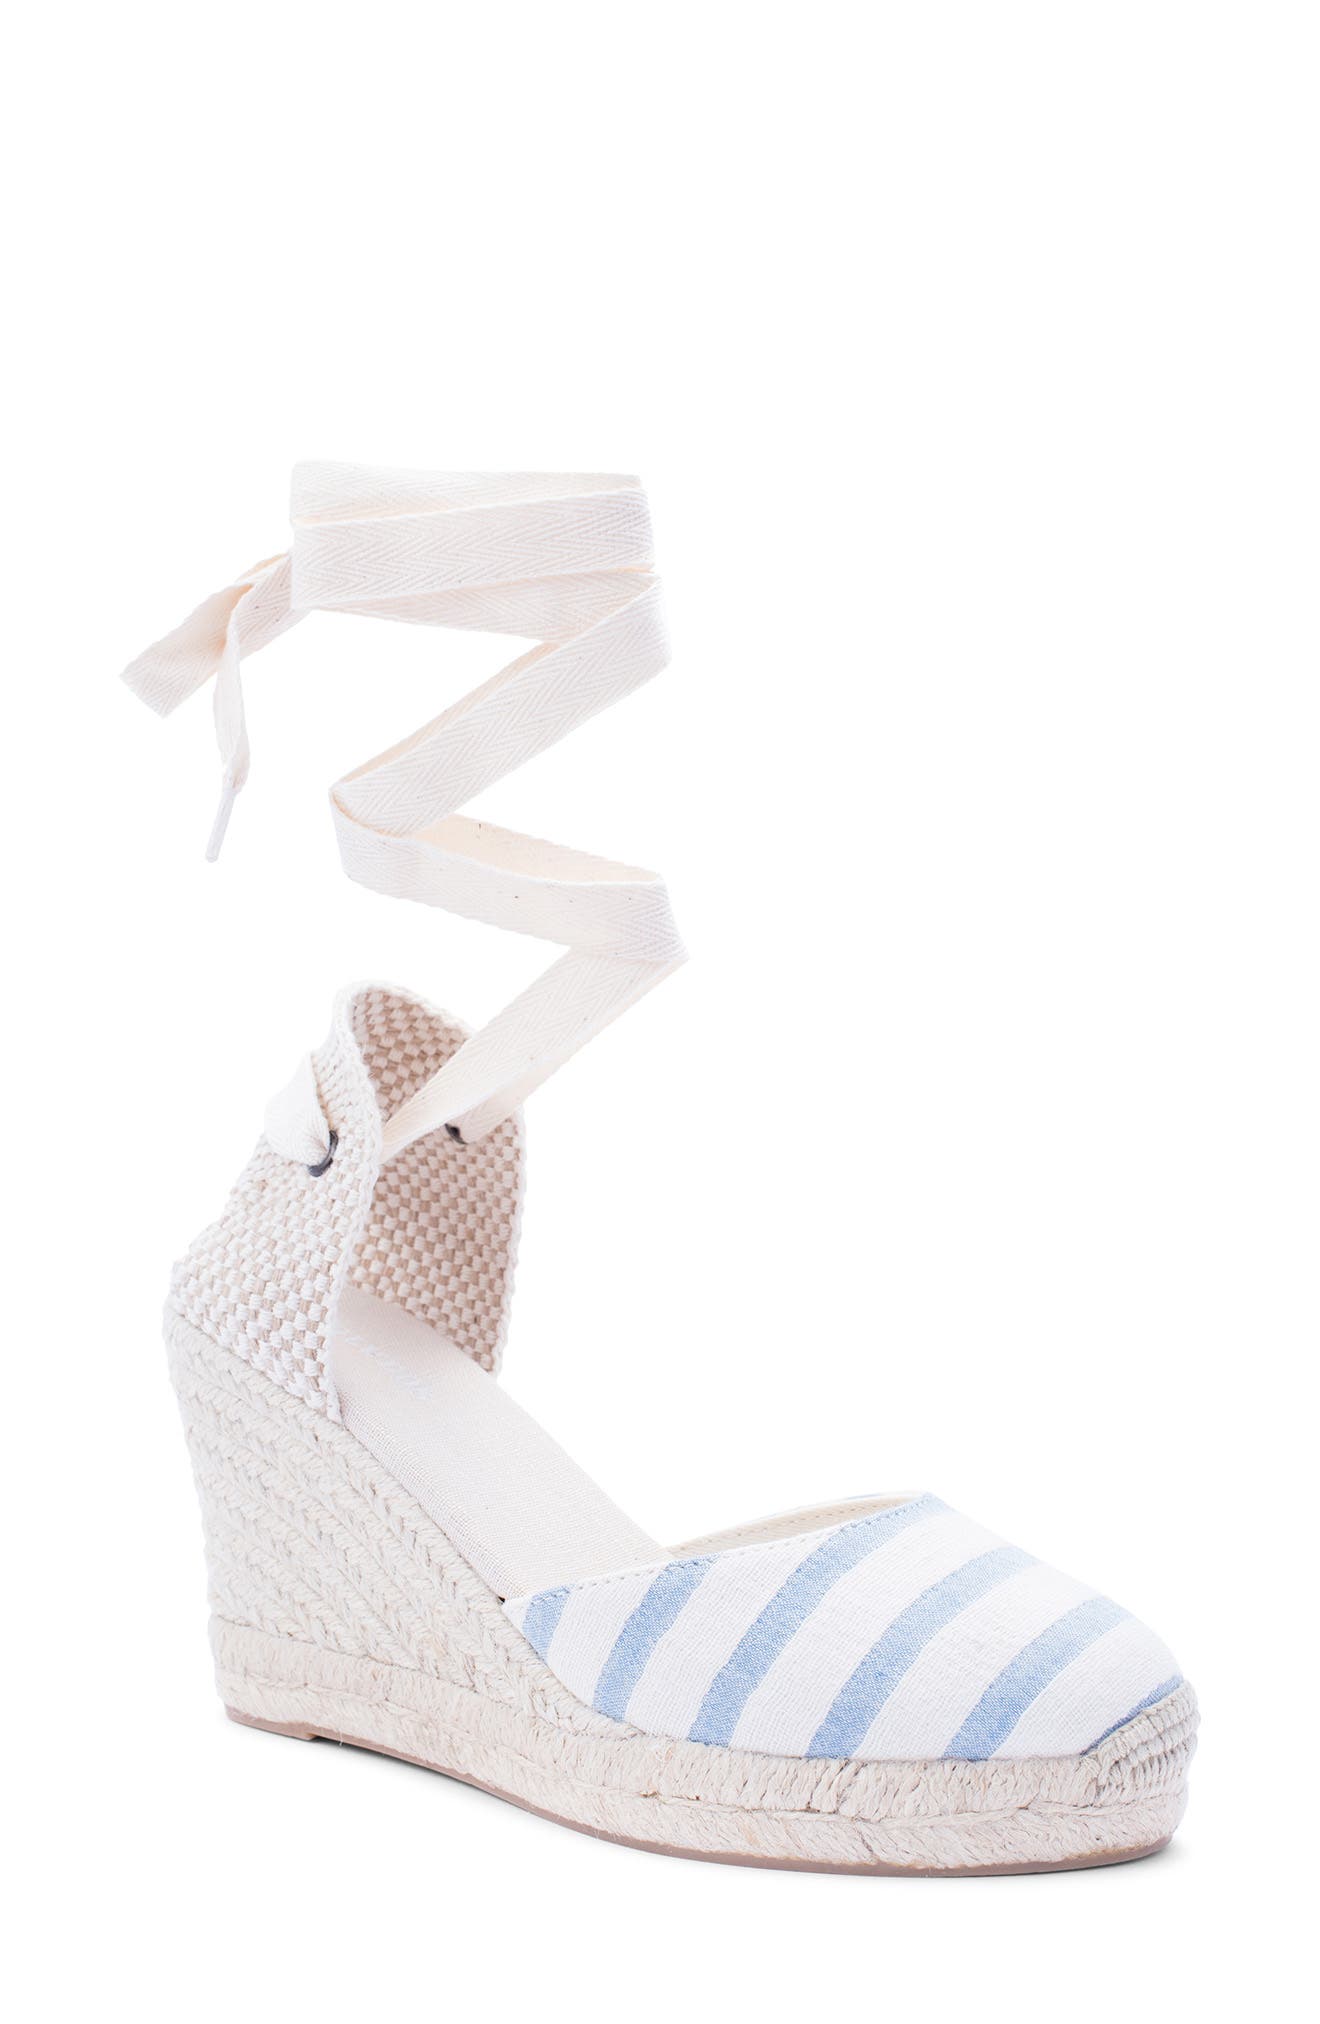 white lace up espadrille wedges